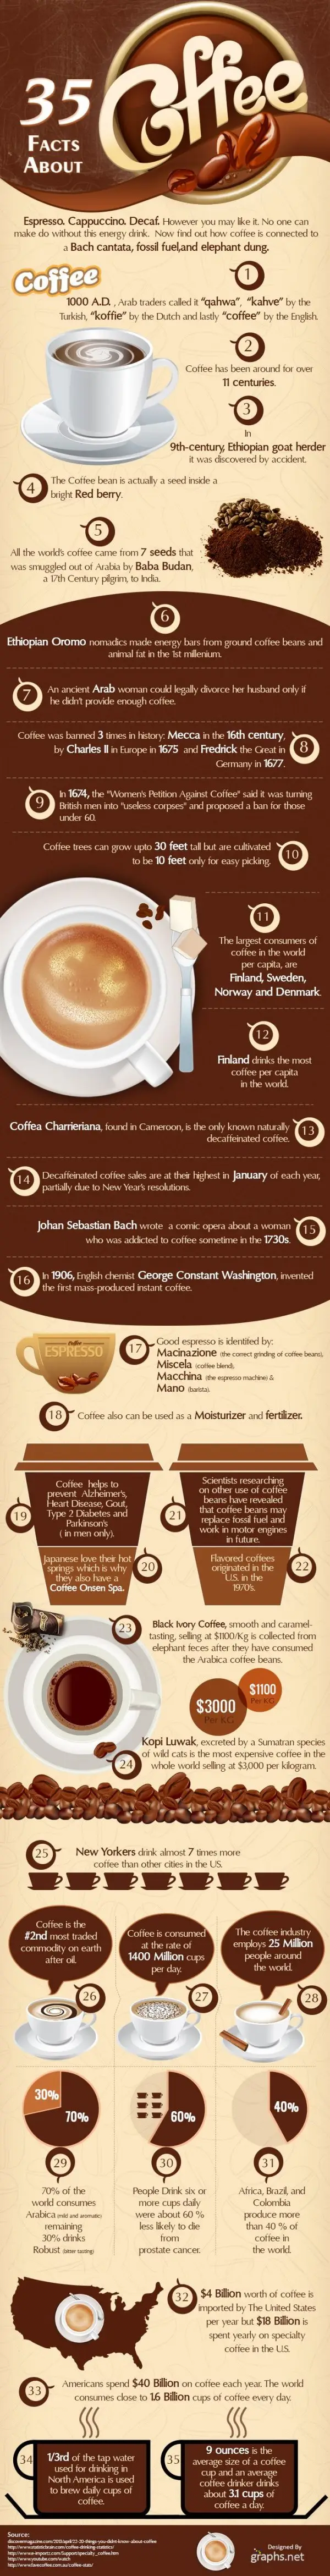 Coffee Lovers Rejoice! 38 Ways to Make a Perfect Coffee (Infographic)